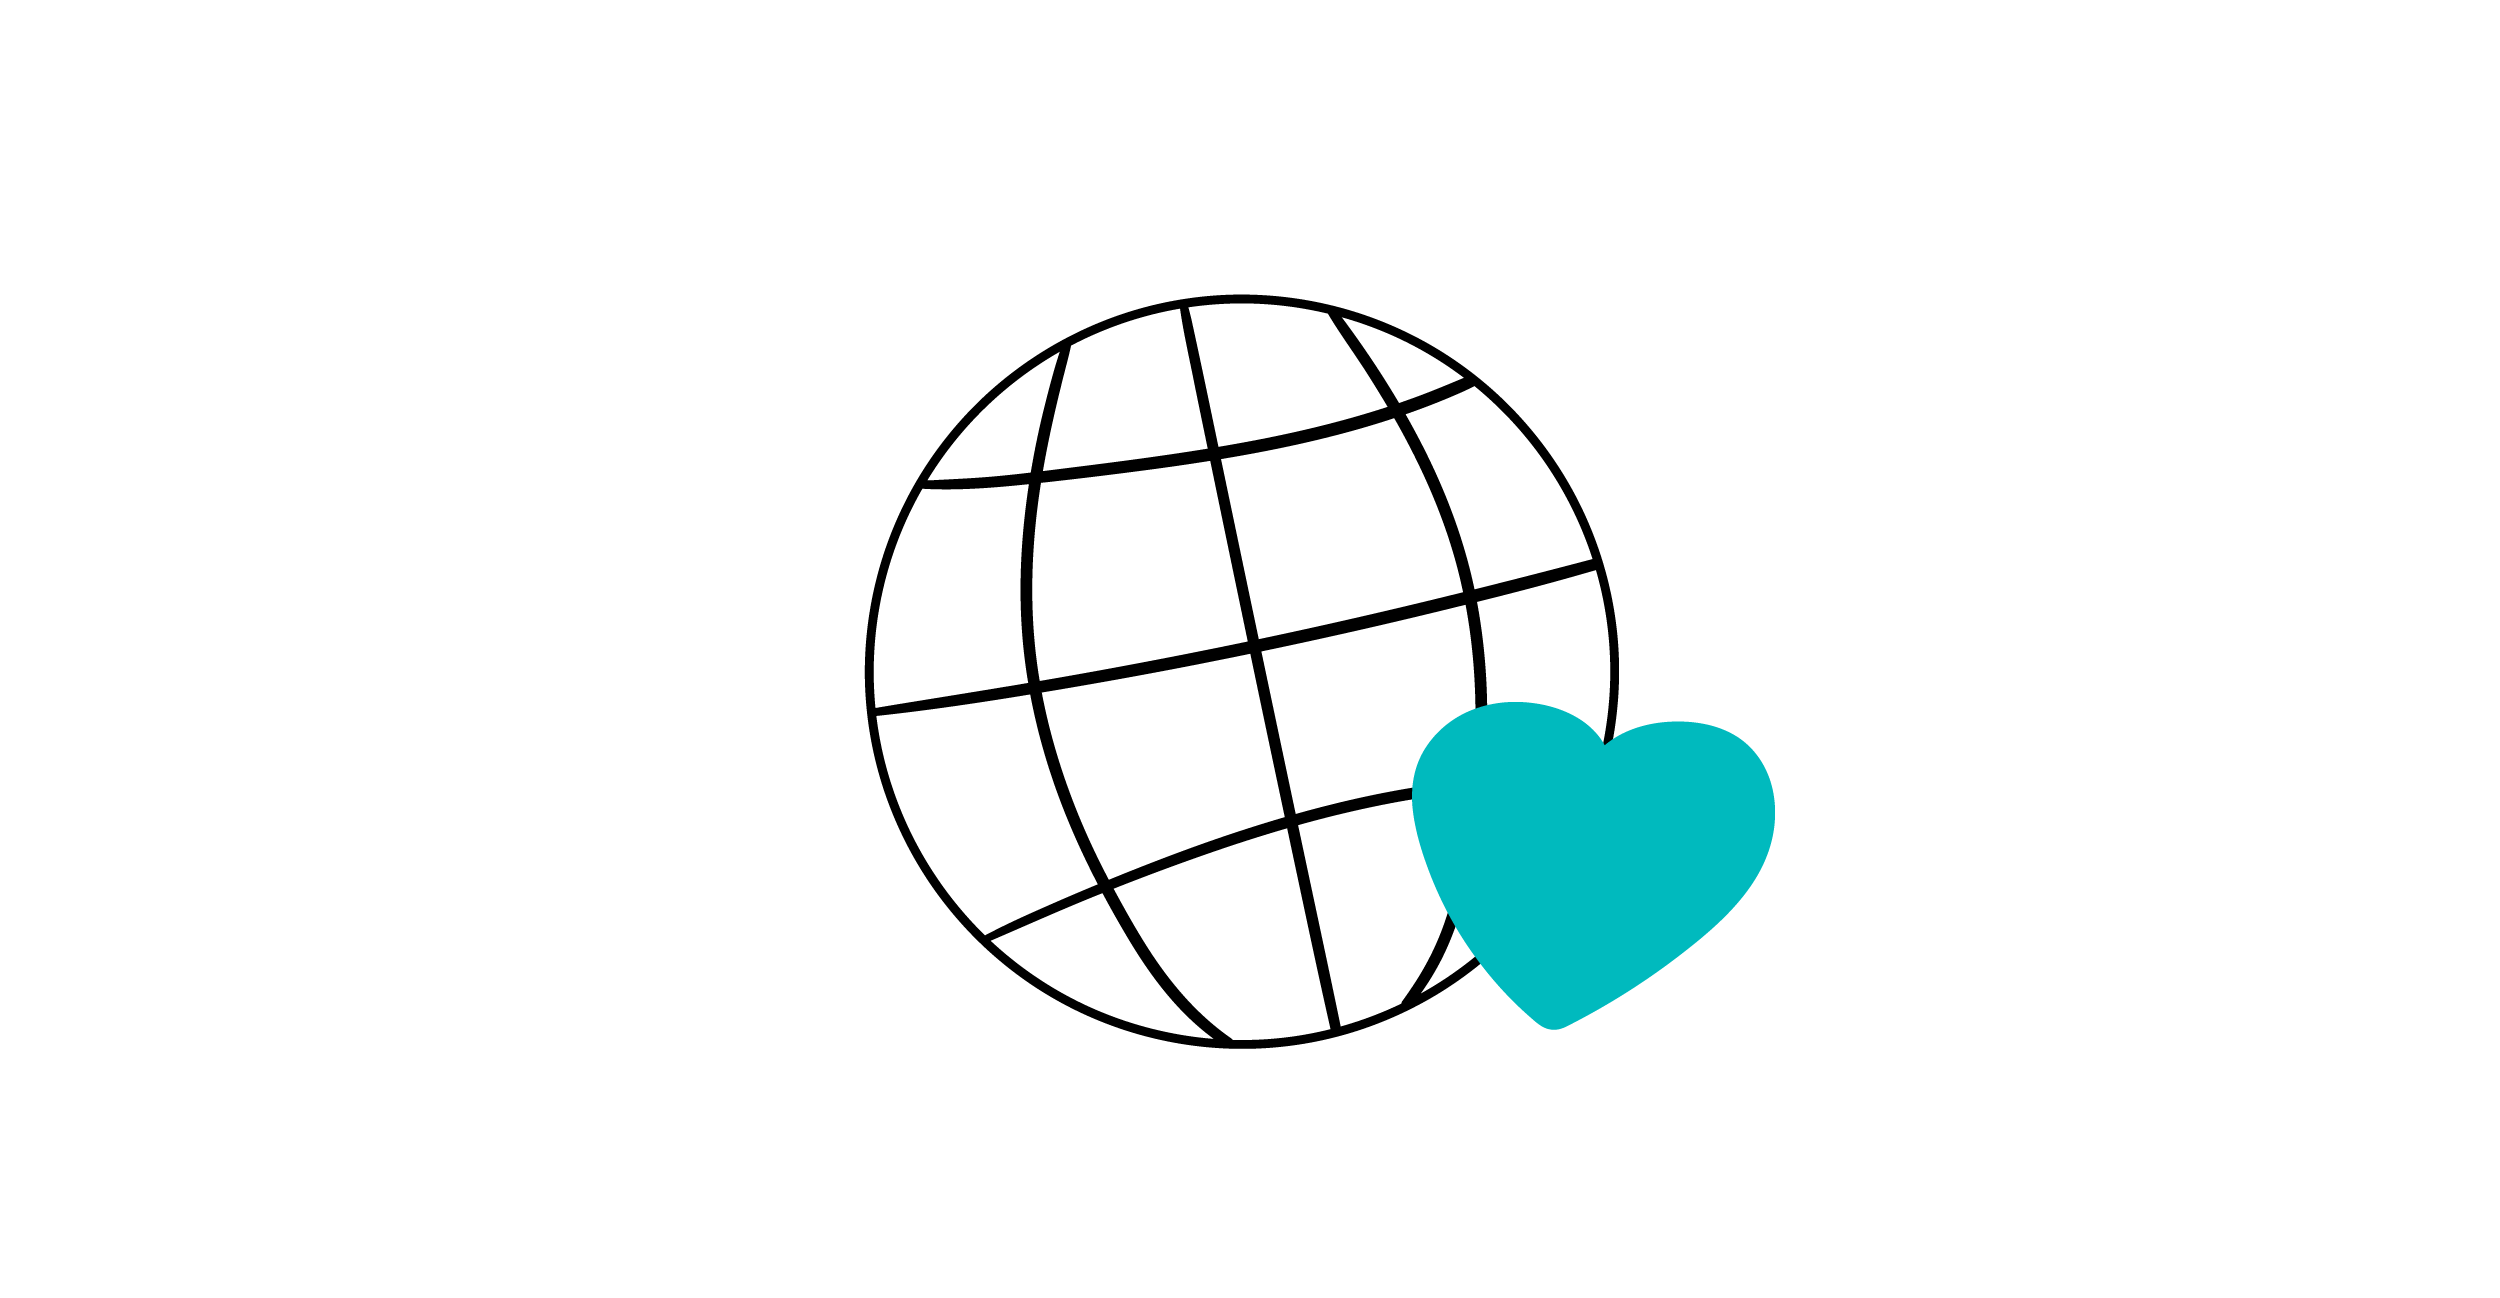 Illustration of a globe and a heart